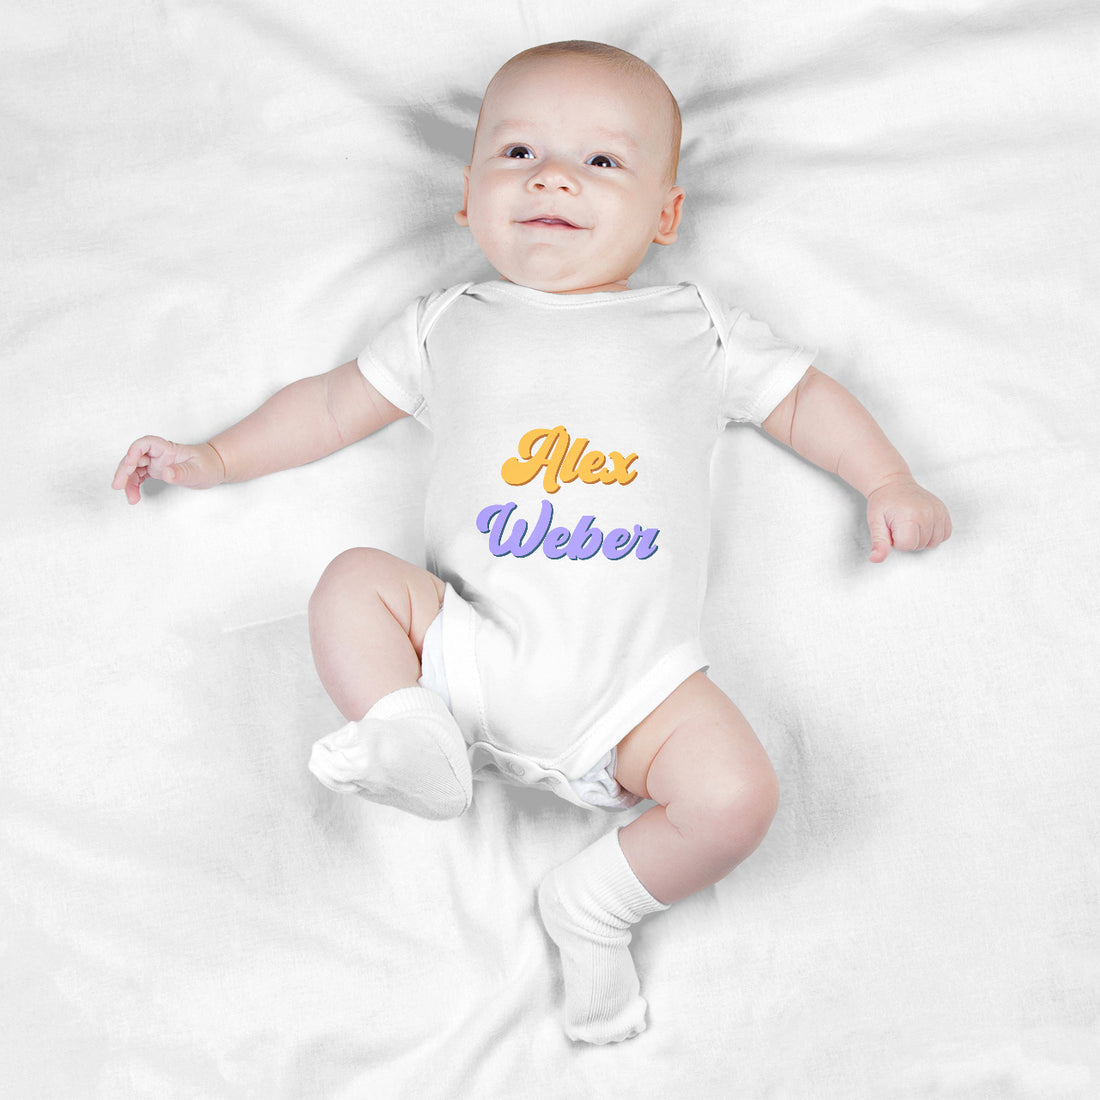 Personalized Baby Bodysuit Onesie For Newborn With Name